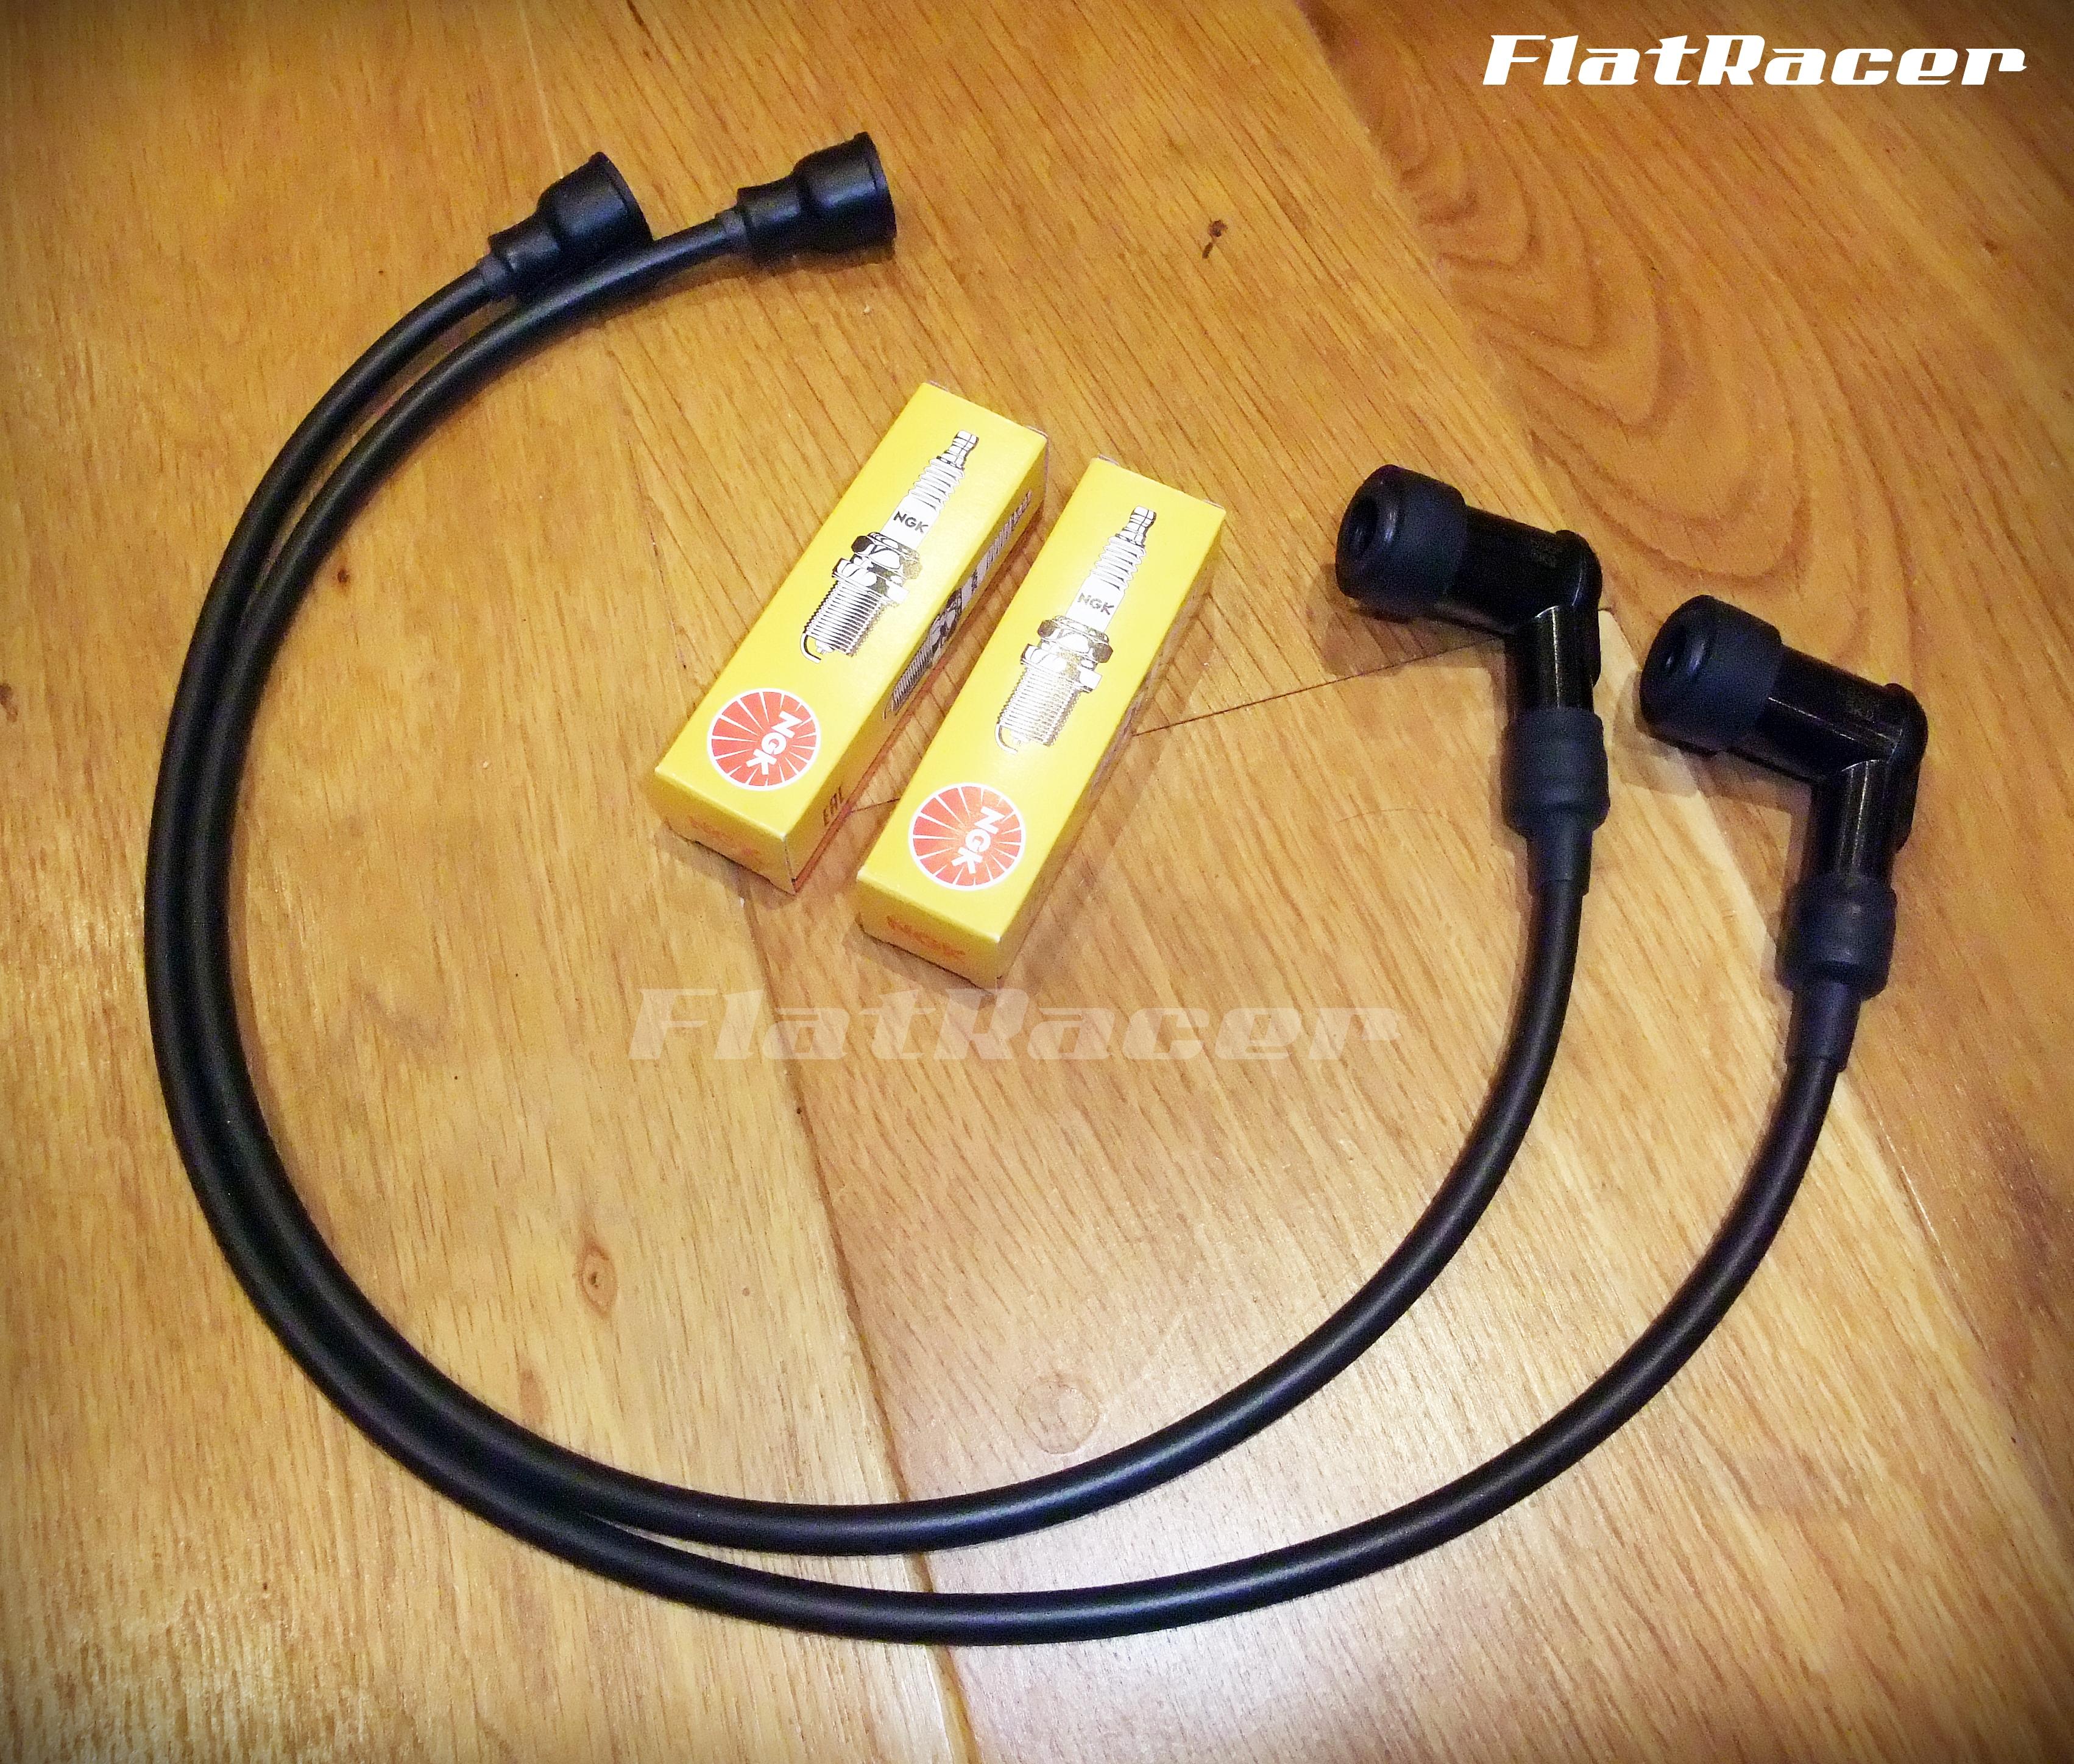 FlatRacer BMW Airhead Boxer post 1981 ignition HT lead kit